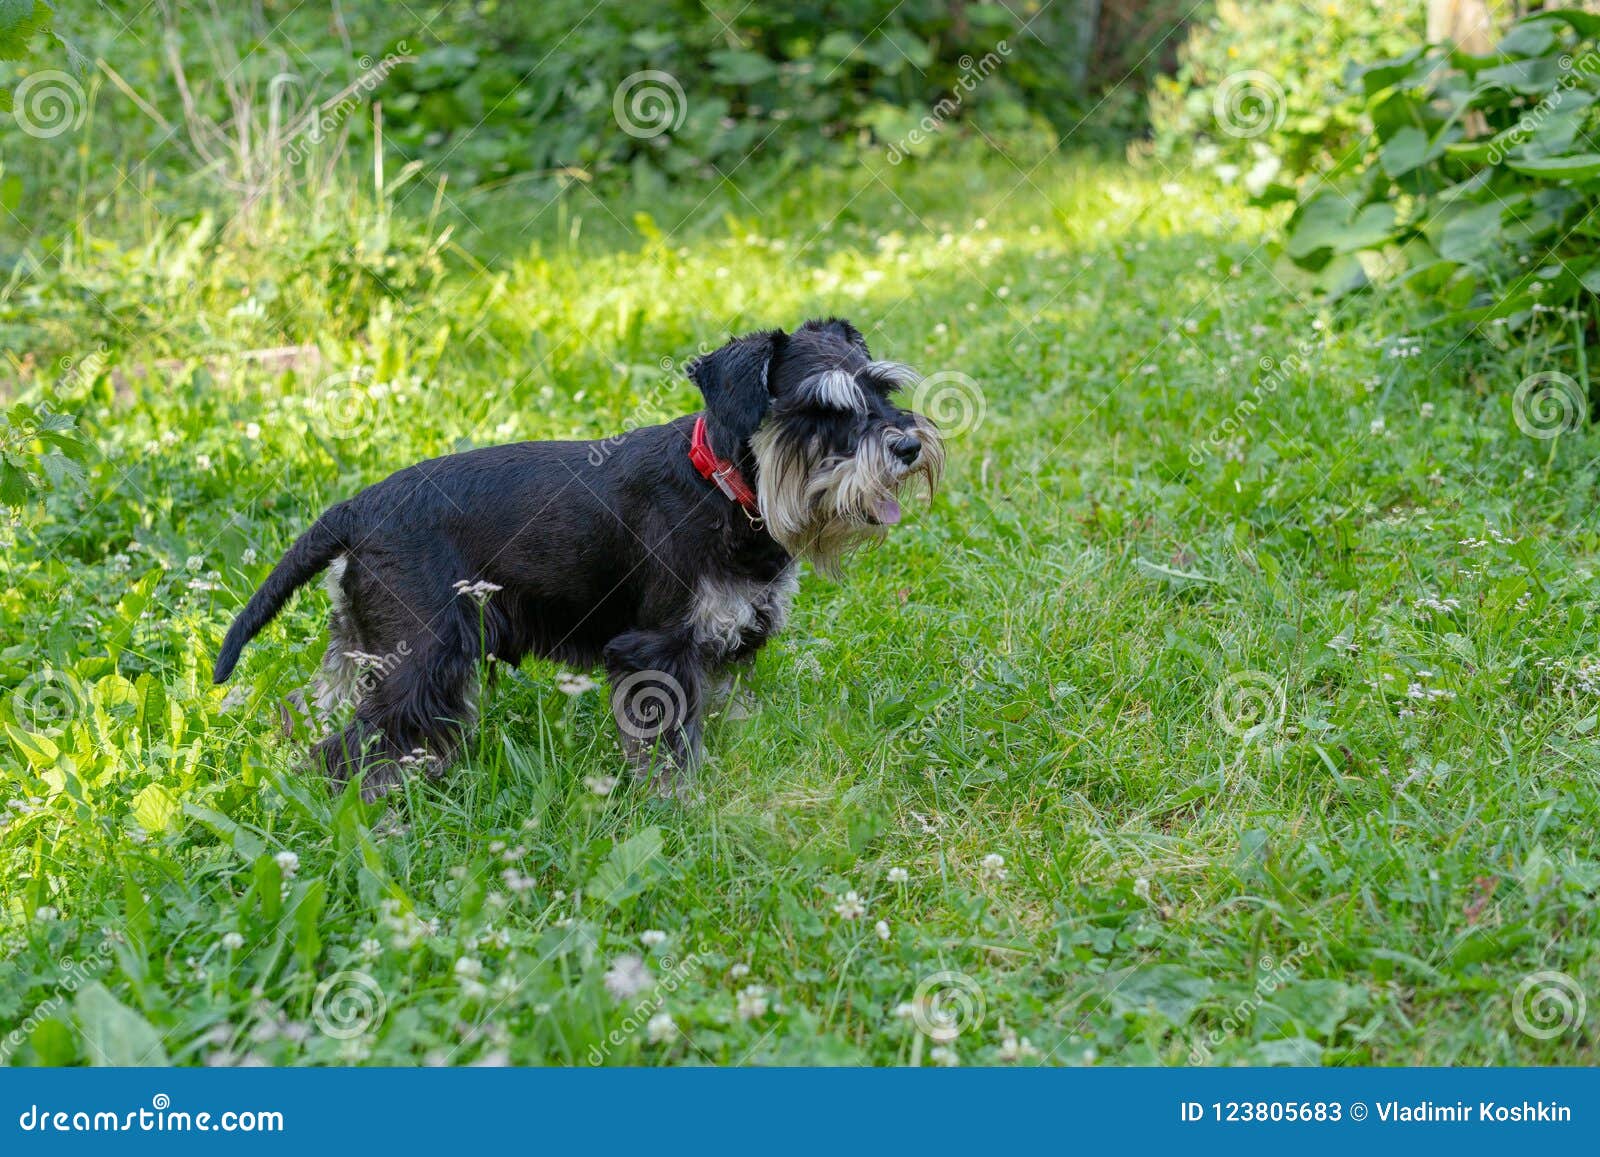 Schnauzer Stands in the Garden Stock Image - Image of pedigree, animal ...